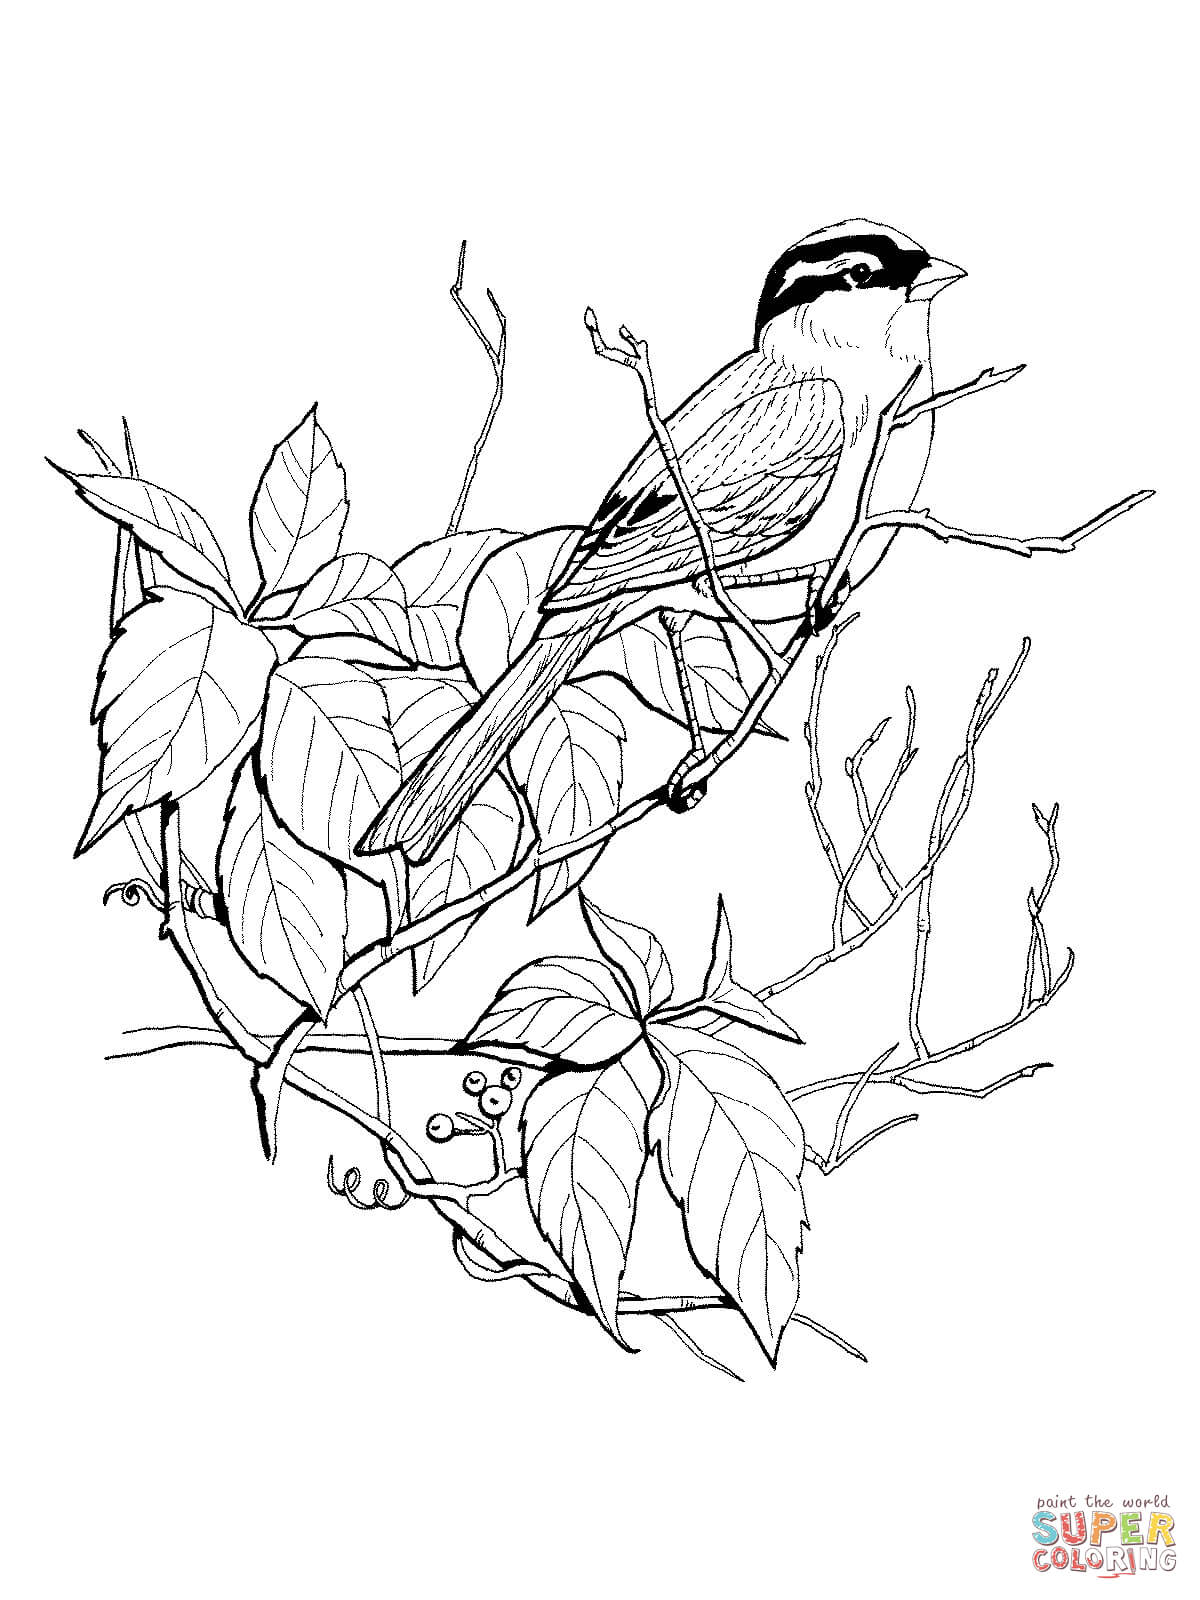 White-crowned Sparrow coloring #5, Download drawings